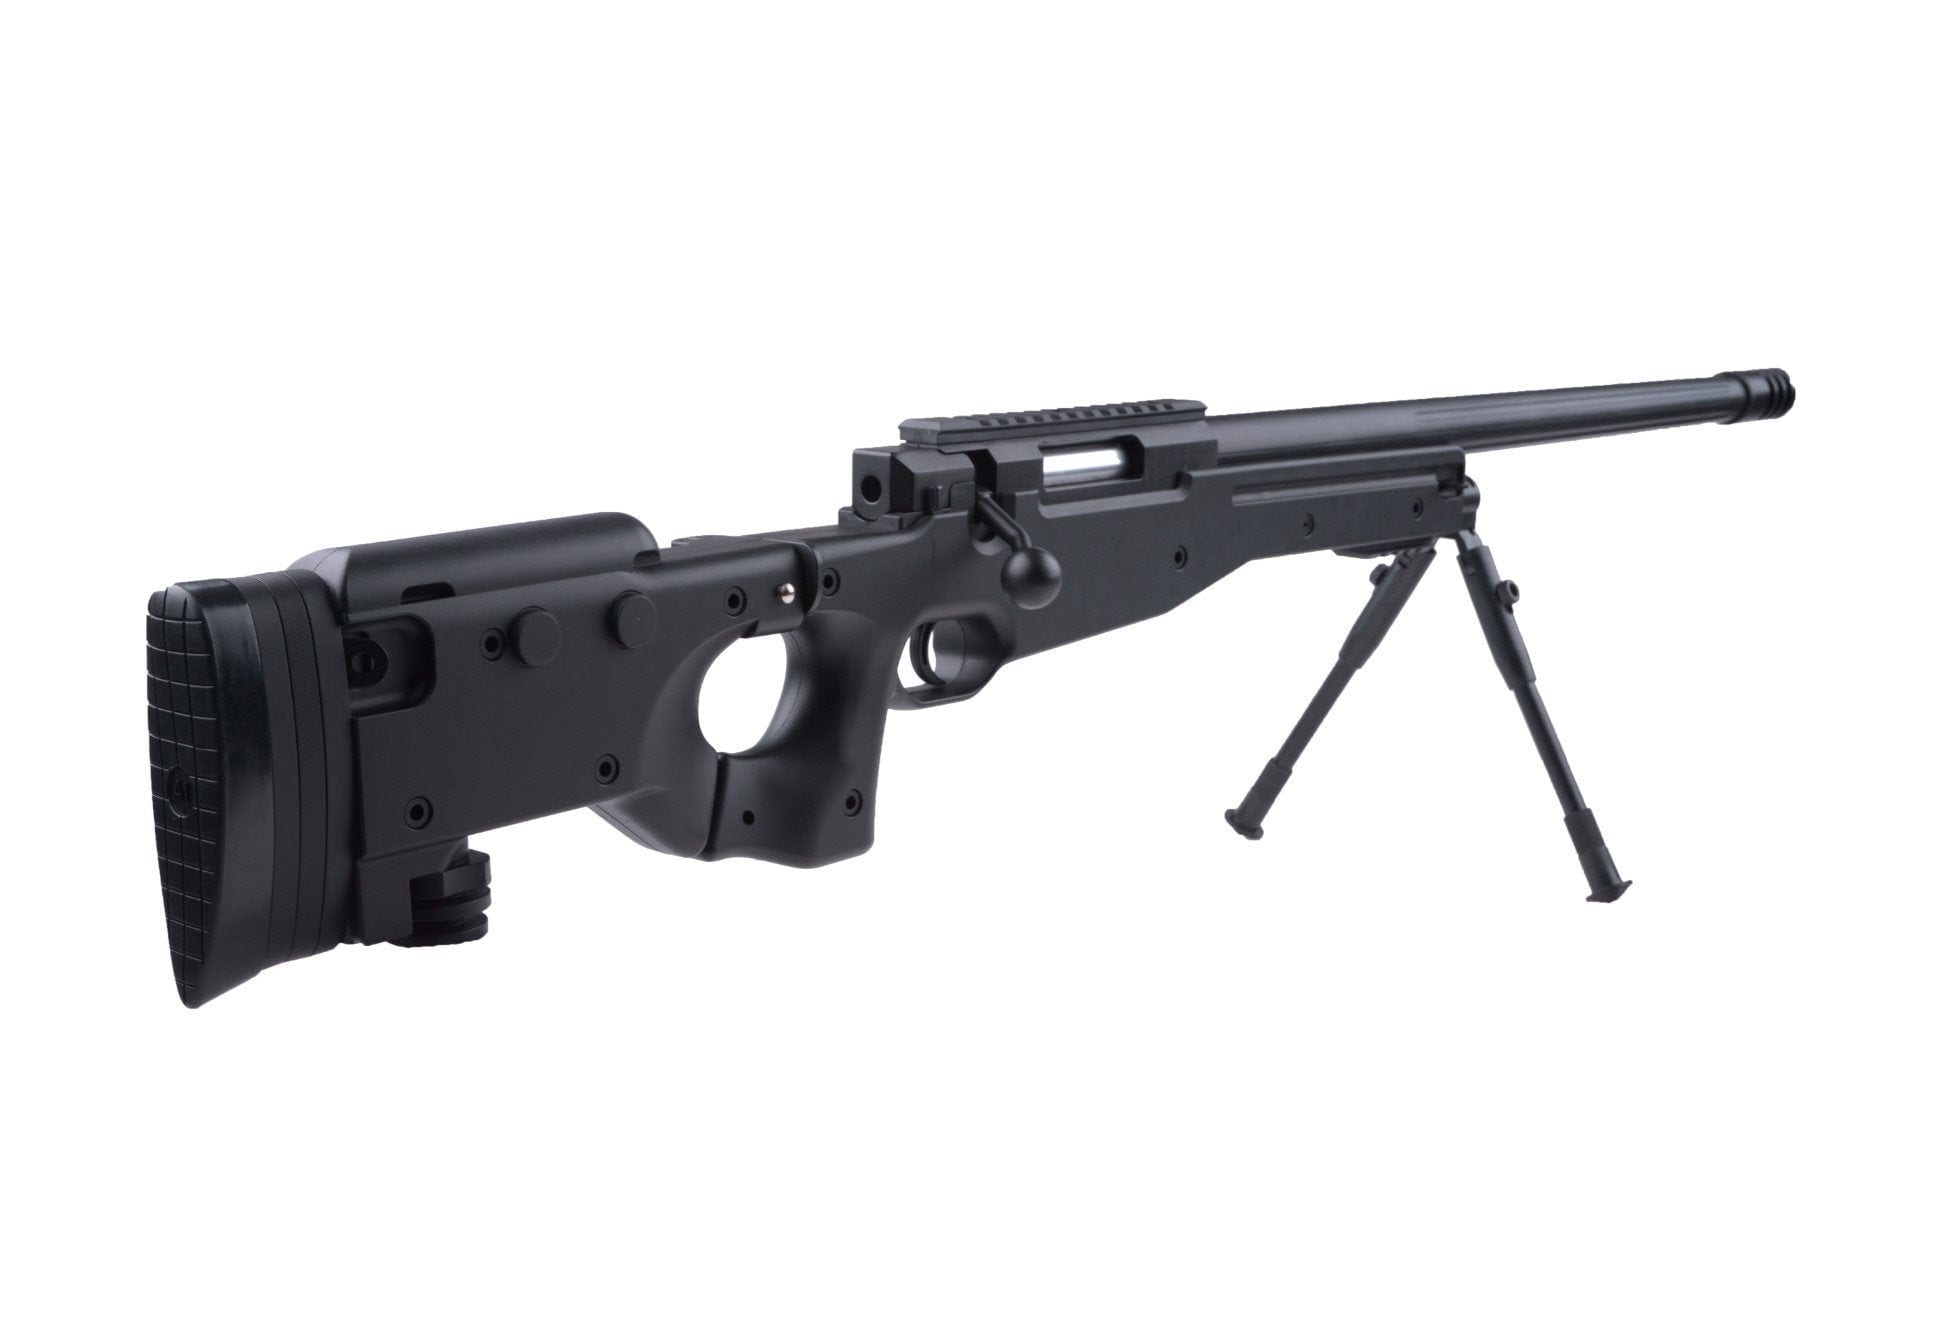 Replica P288 Sniper Rifle with Bipod - Black by AGM on Airsoft Mania Europe